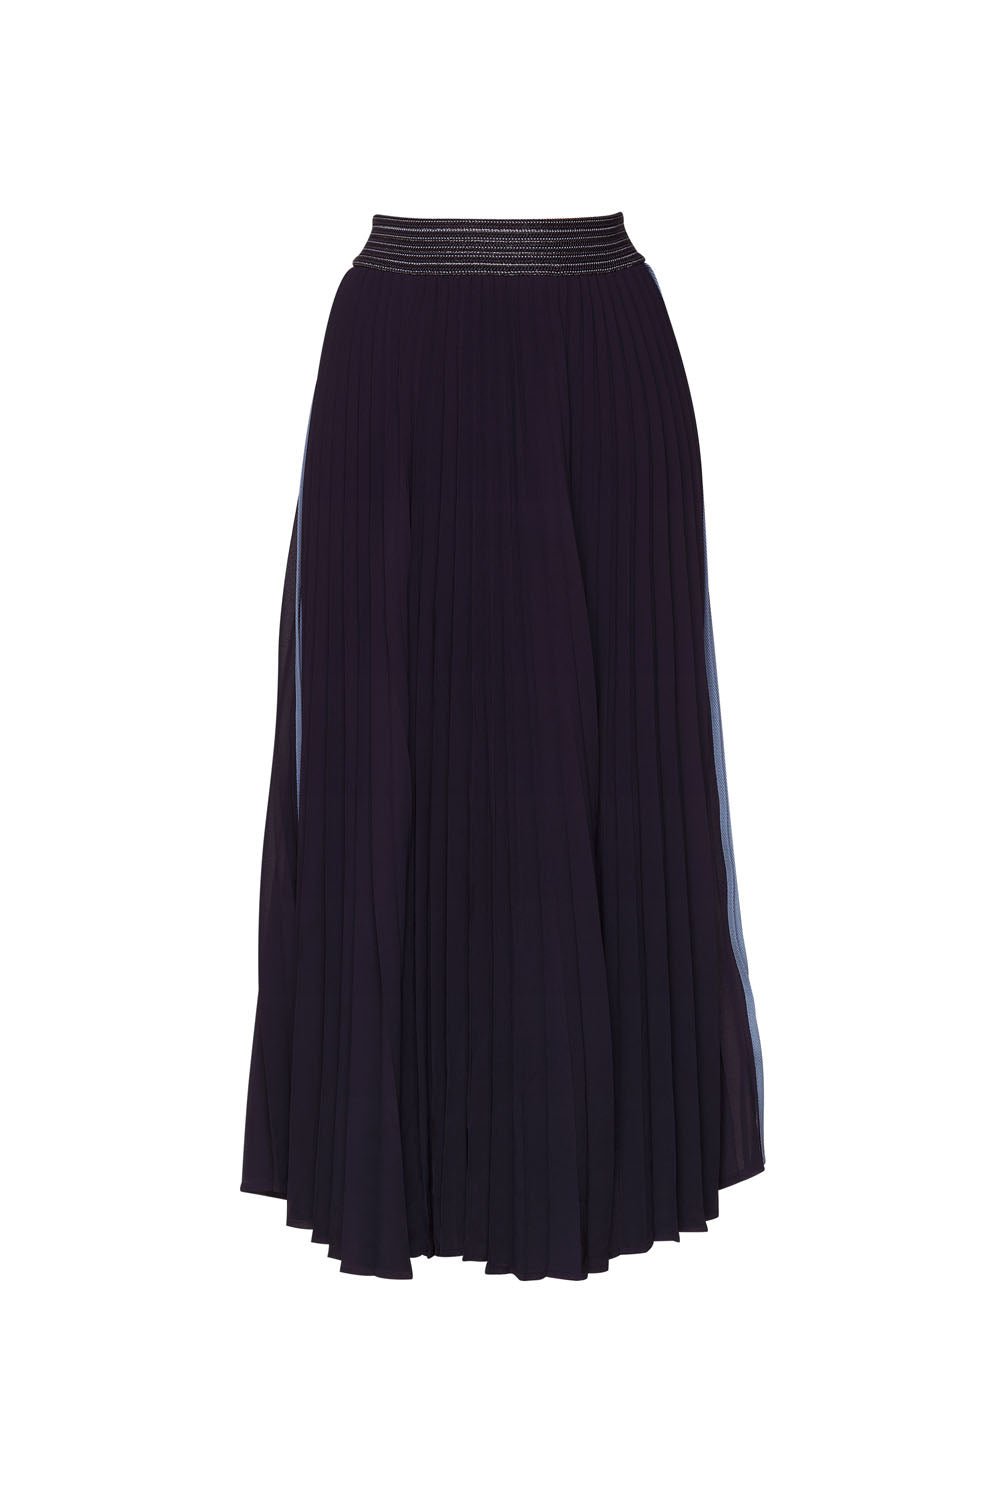 Shop Just Pleat It Skirt | Navy - Madly Sweetly